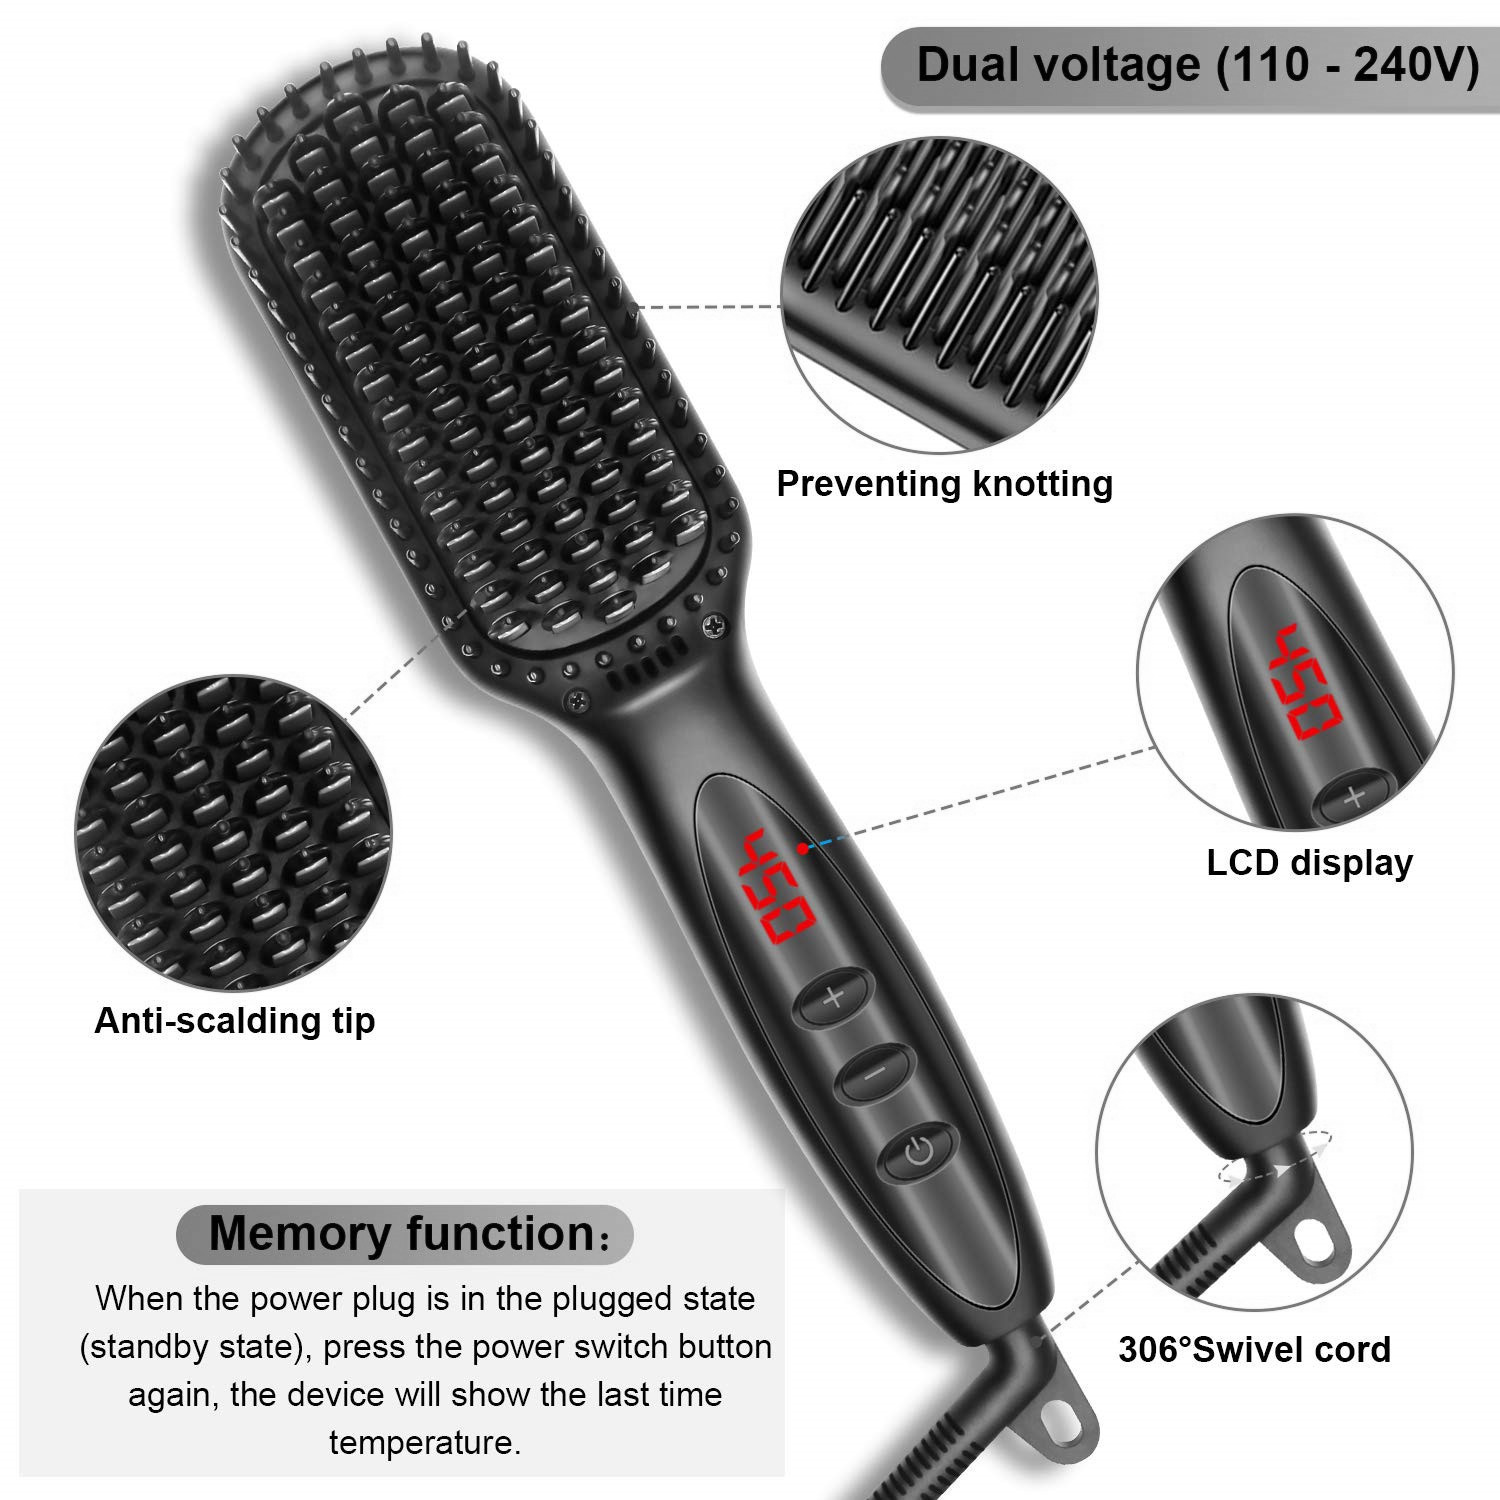 Hair Straightener Brush, Sharpdo Ionic Hair Straightening Brush with Fast MCH Ceramic Heating, Anti-Scald, Auto Temperature Lock and Auto-Off Function, Portable Straightening Comb for Home and Travel